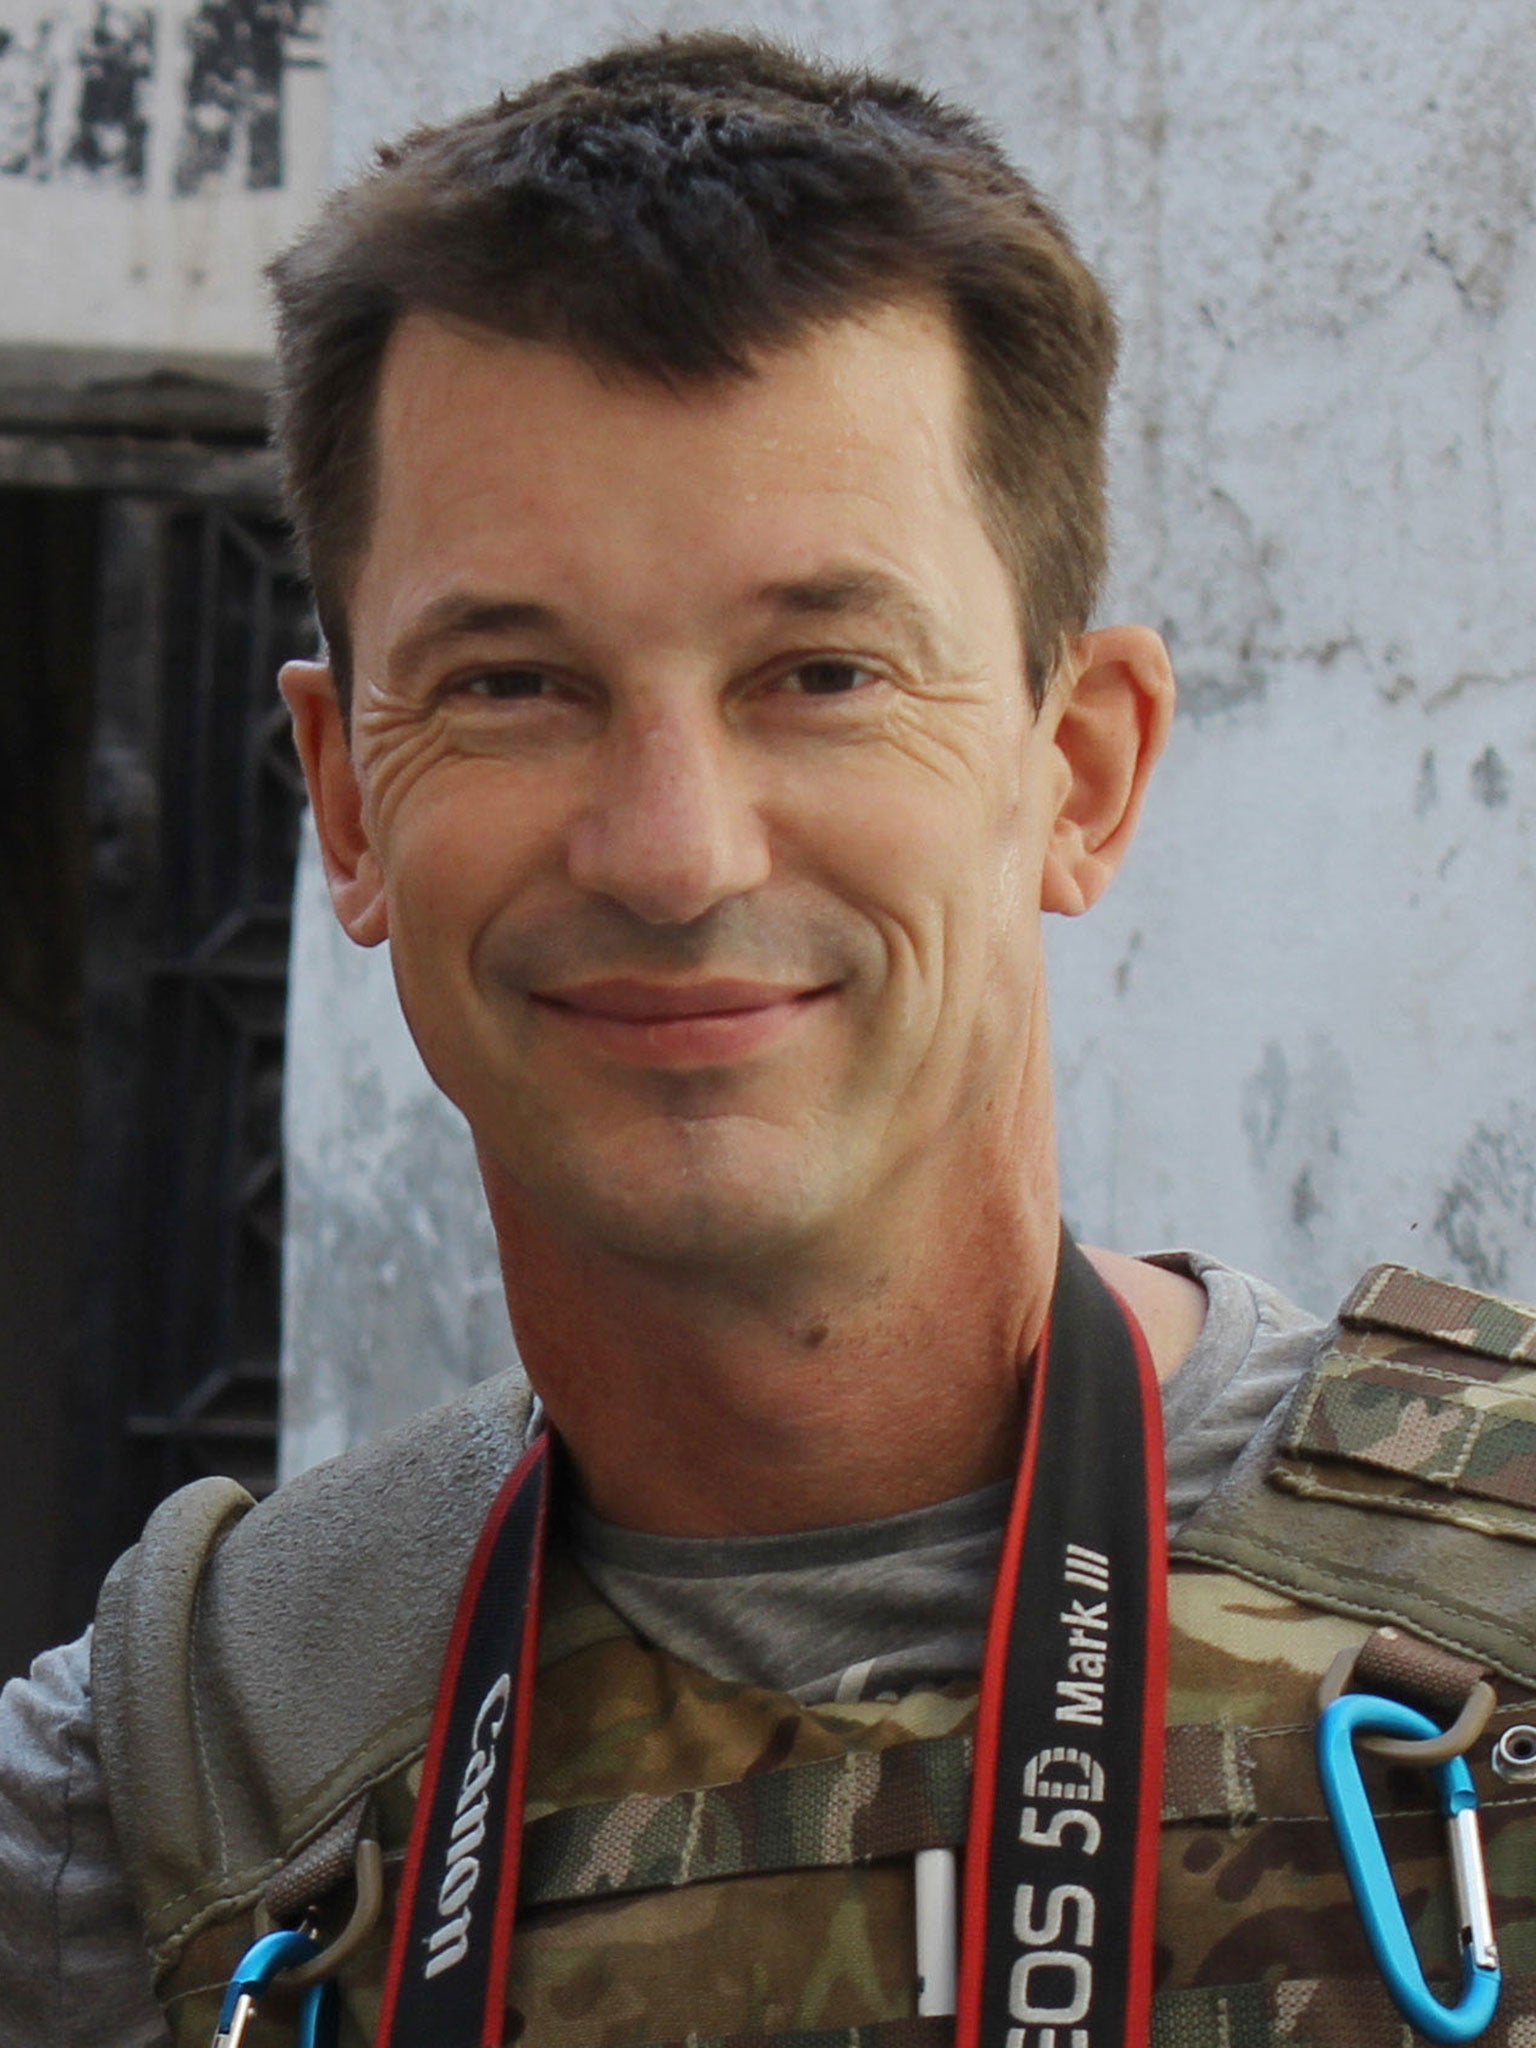 Photojournalist John Cantlie pictured in Aleppo, Syria